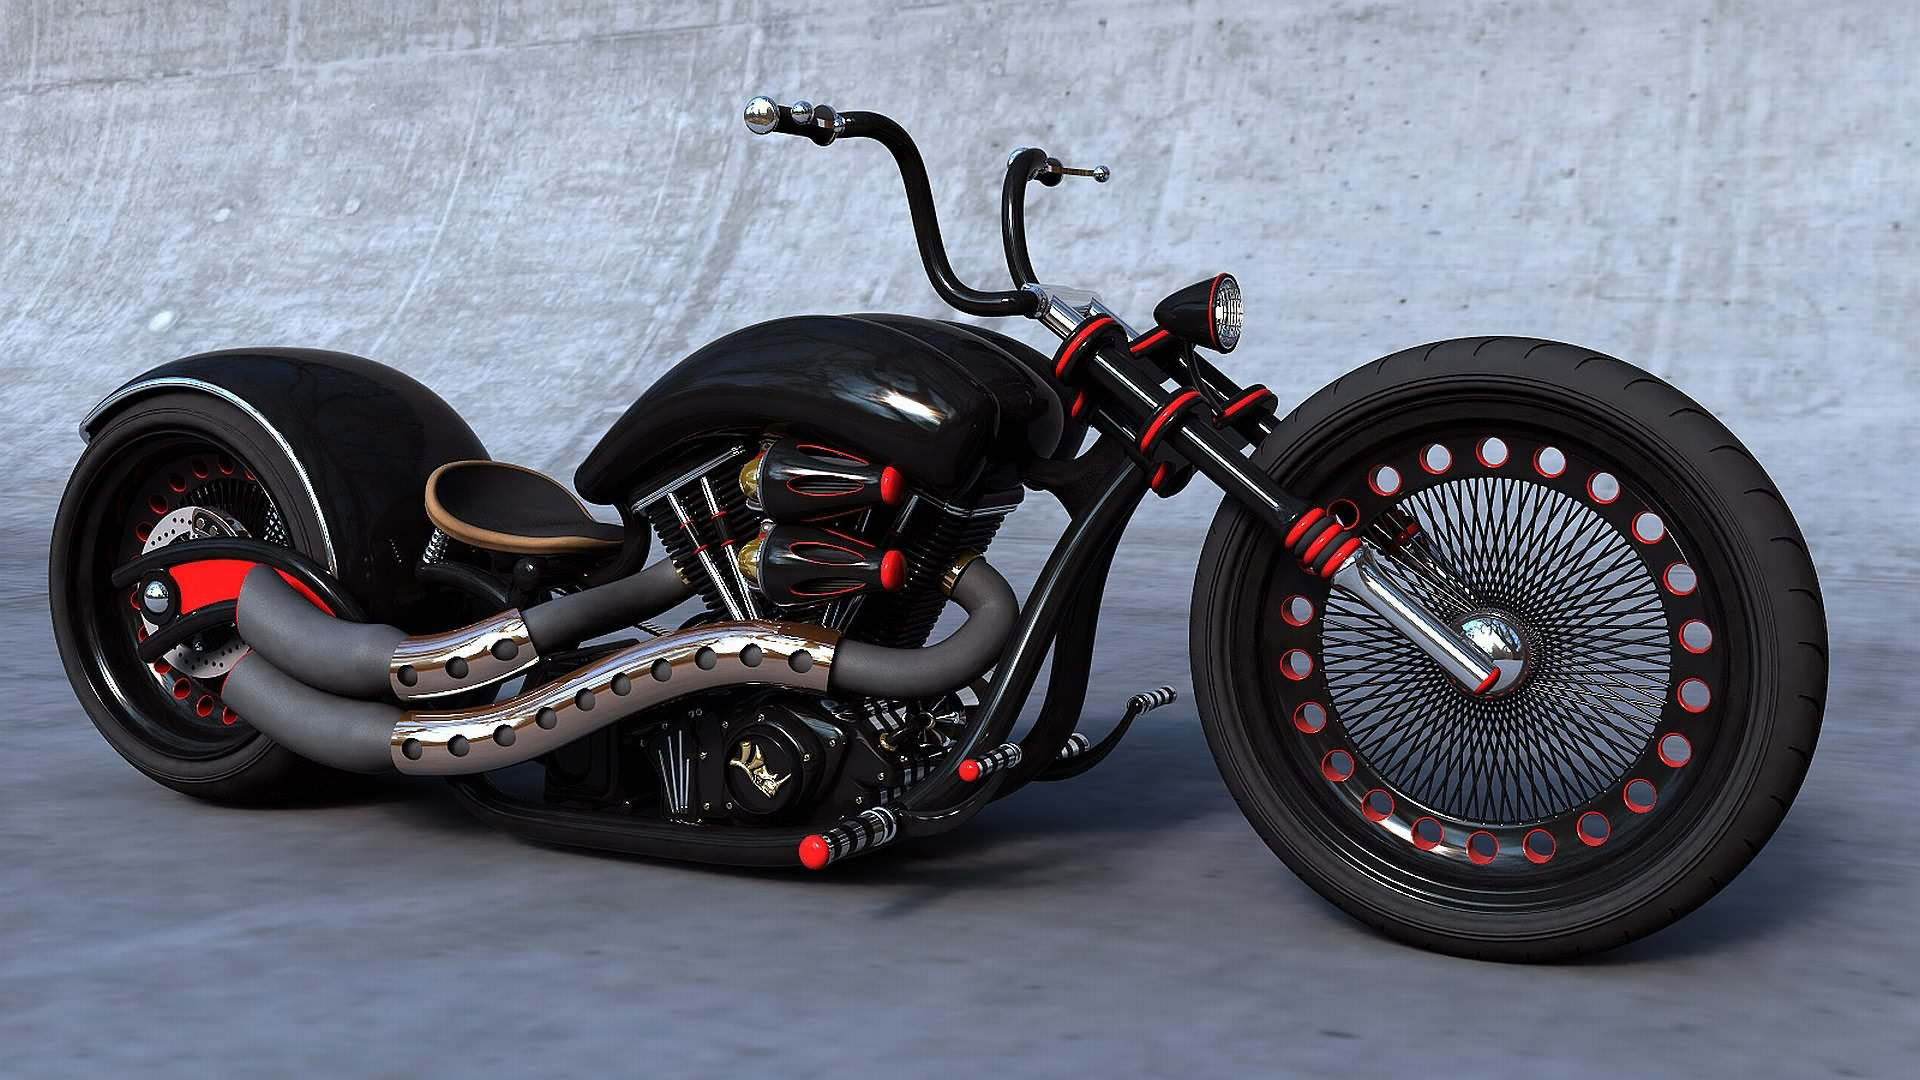 Cool Chopper Wallpaper Black Motorcycle Goodwp Motorcycles Pictures